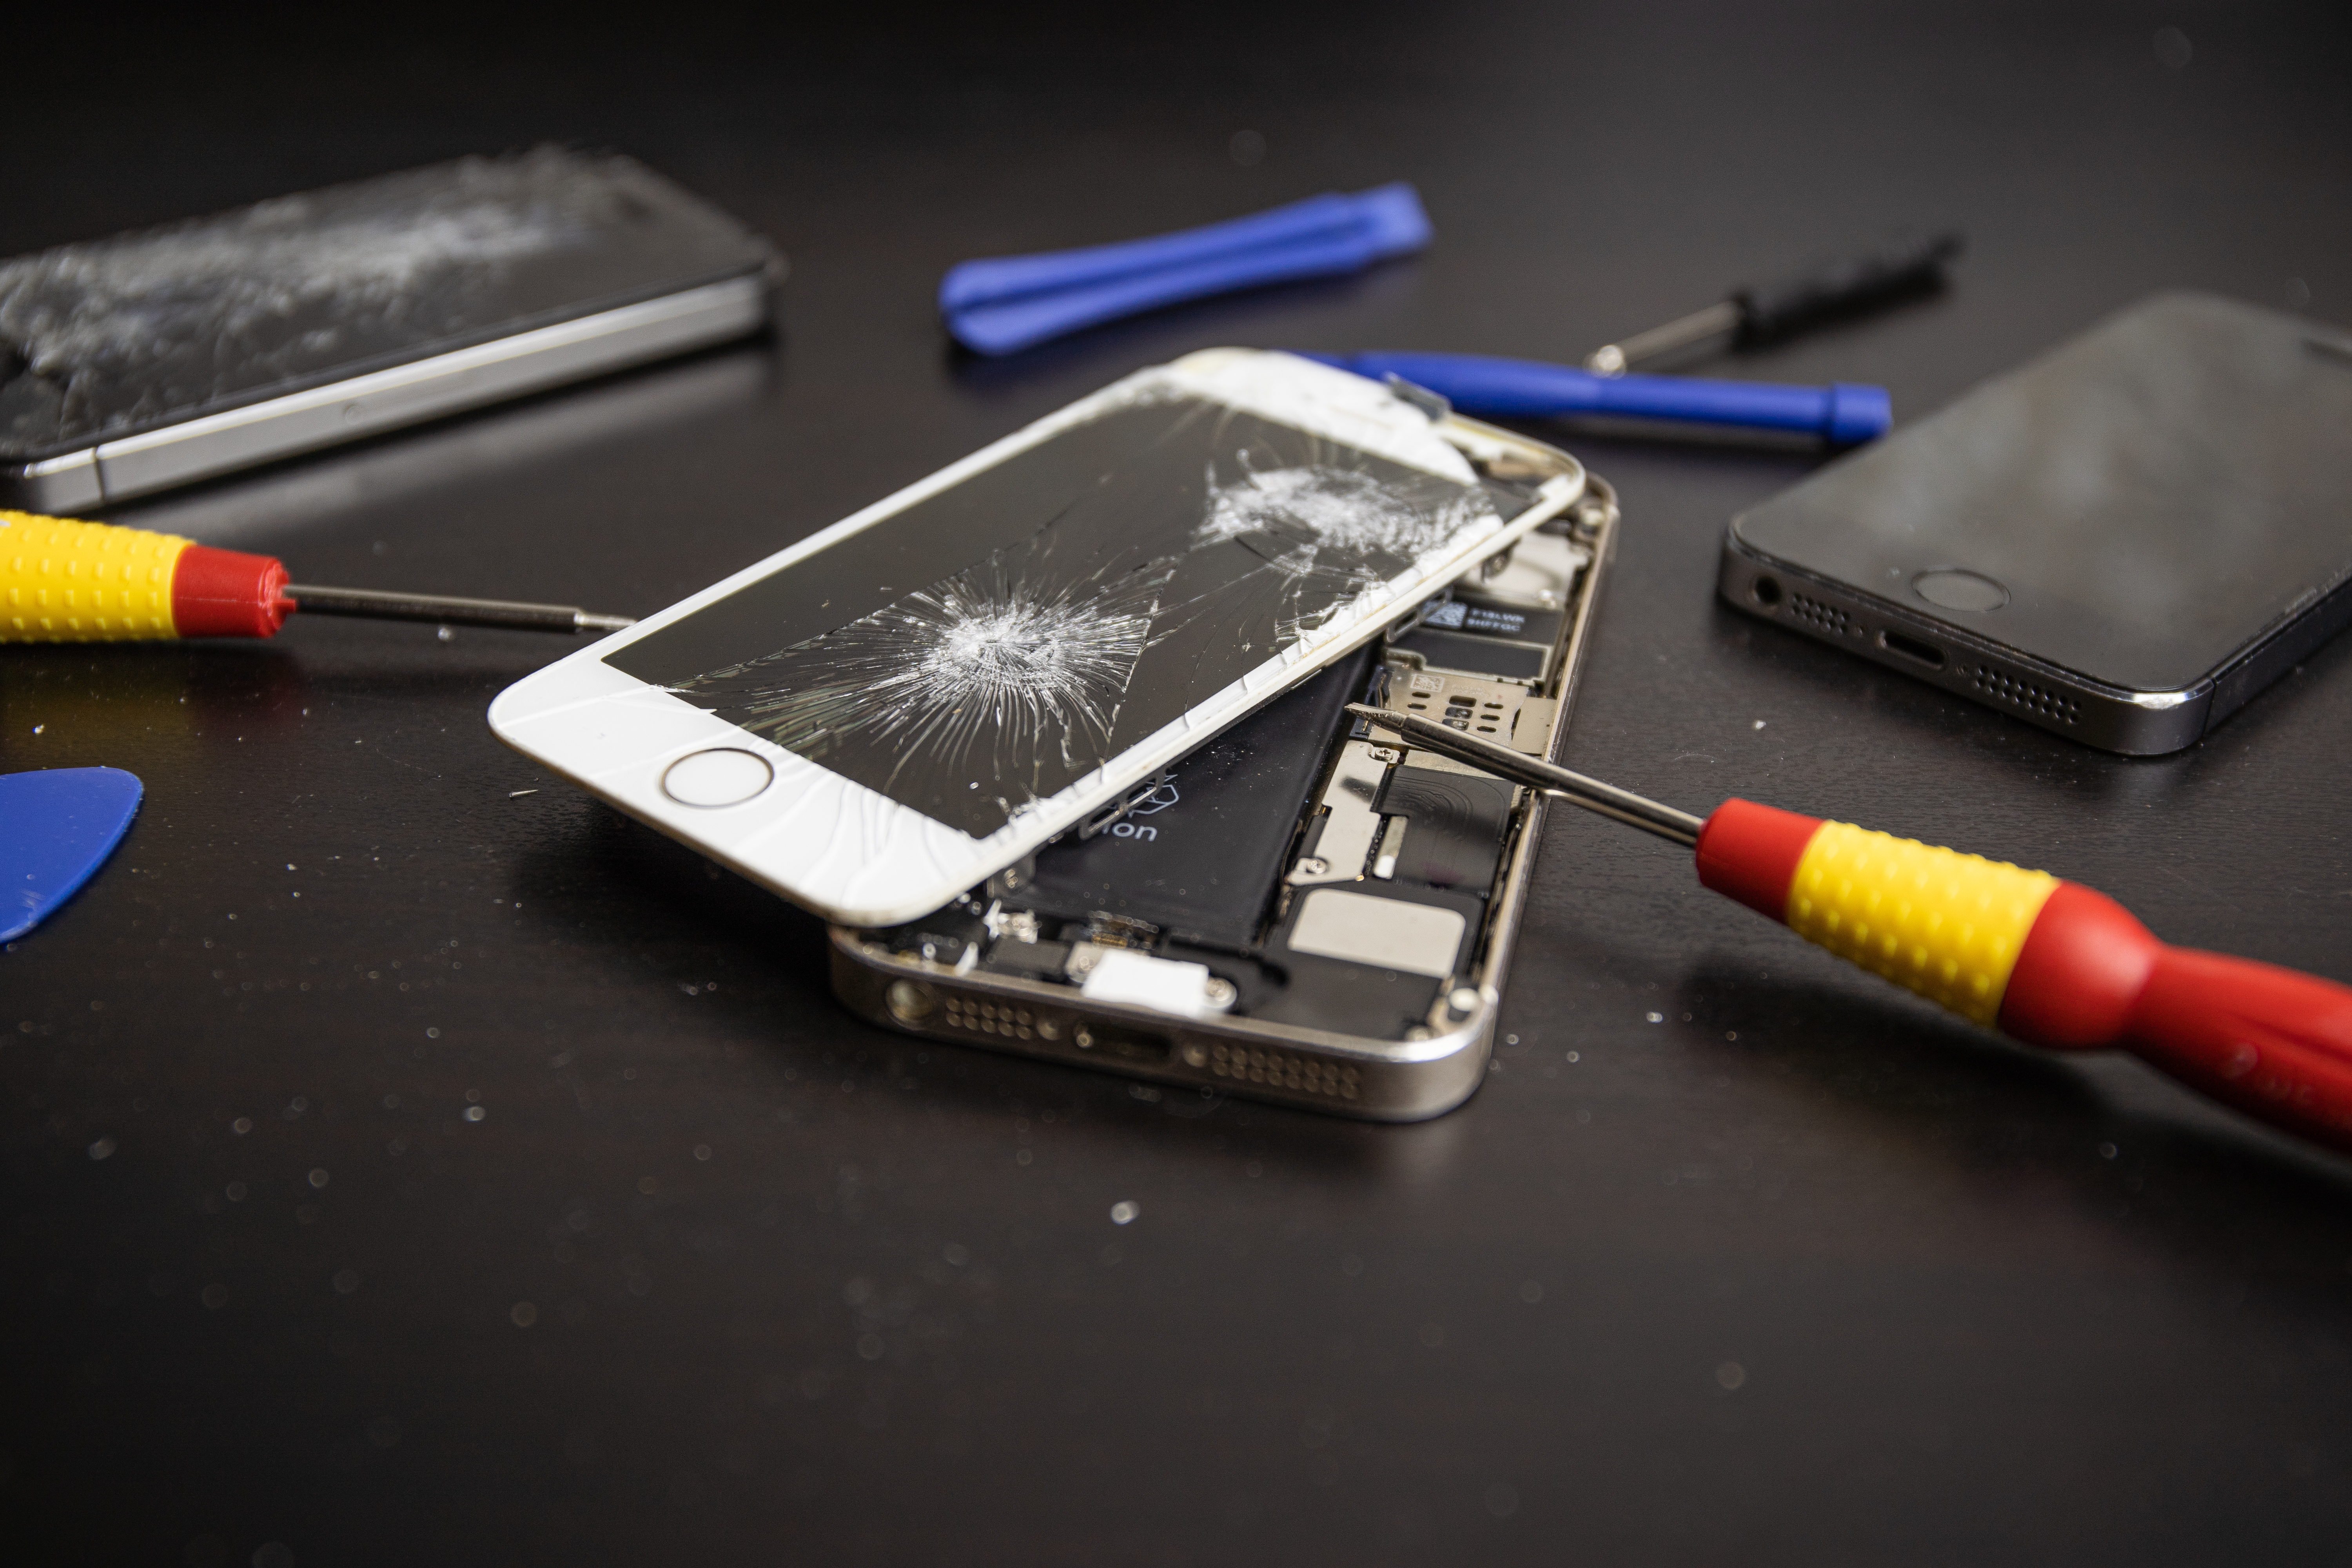 White iPhone with a cracked screen being repaired